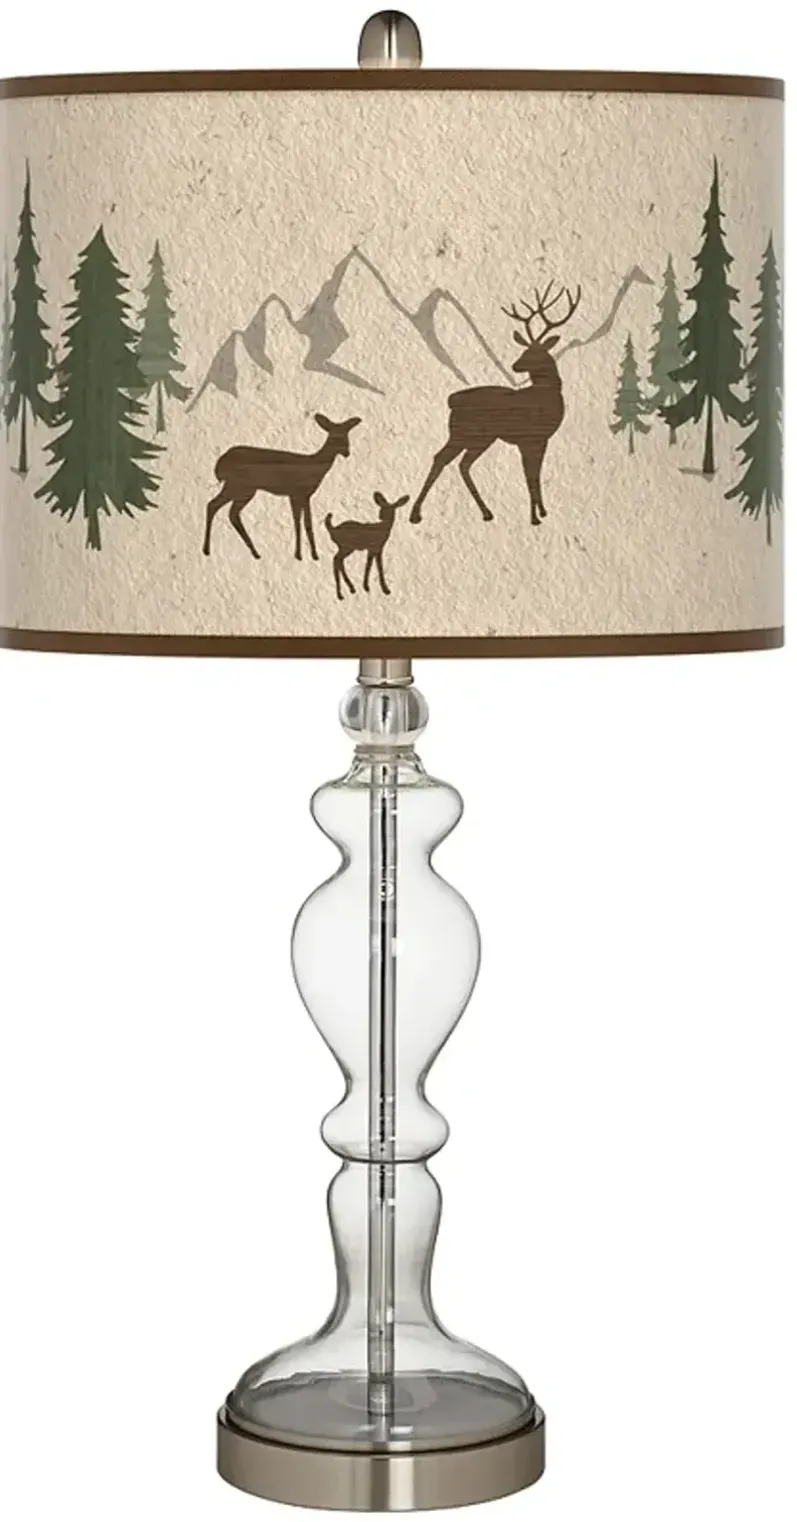 Deer Lodge Giclee Apothecary Clear Glass Table Lamp